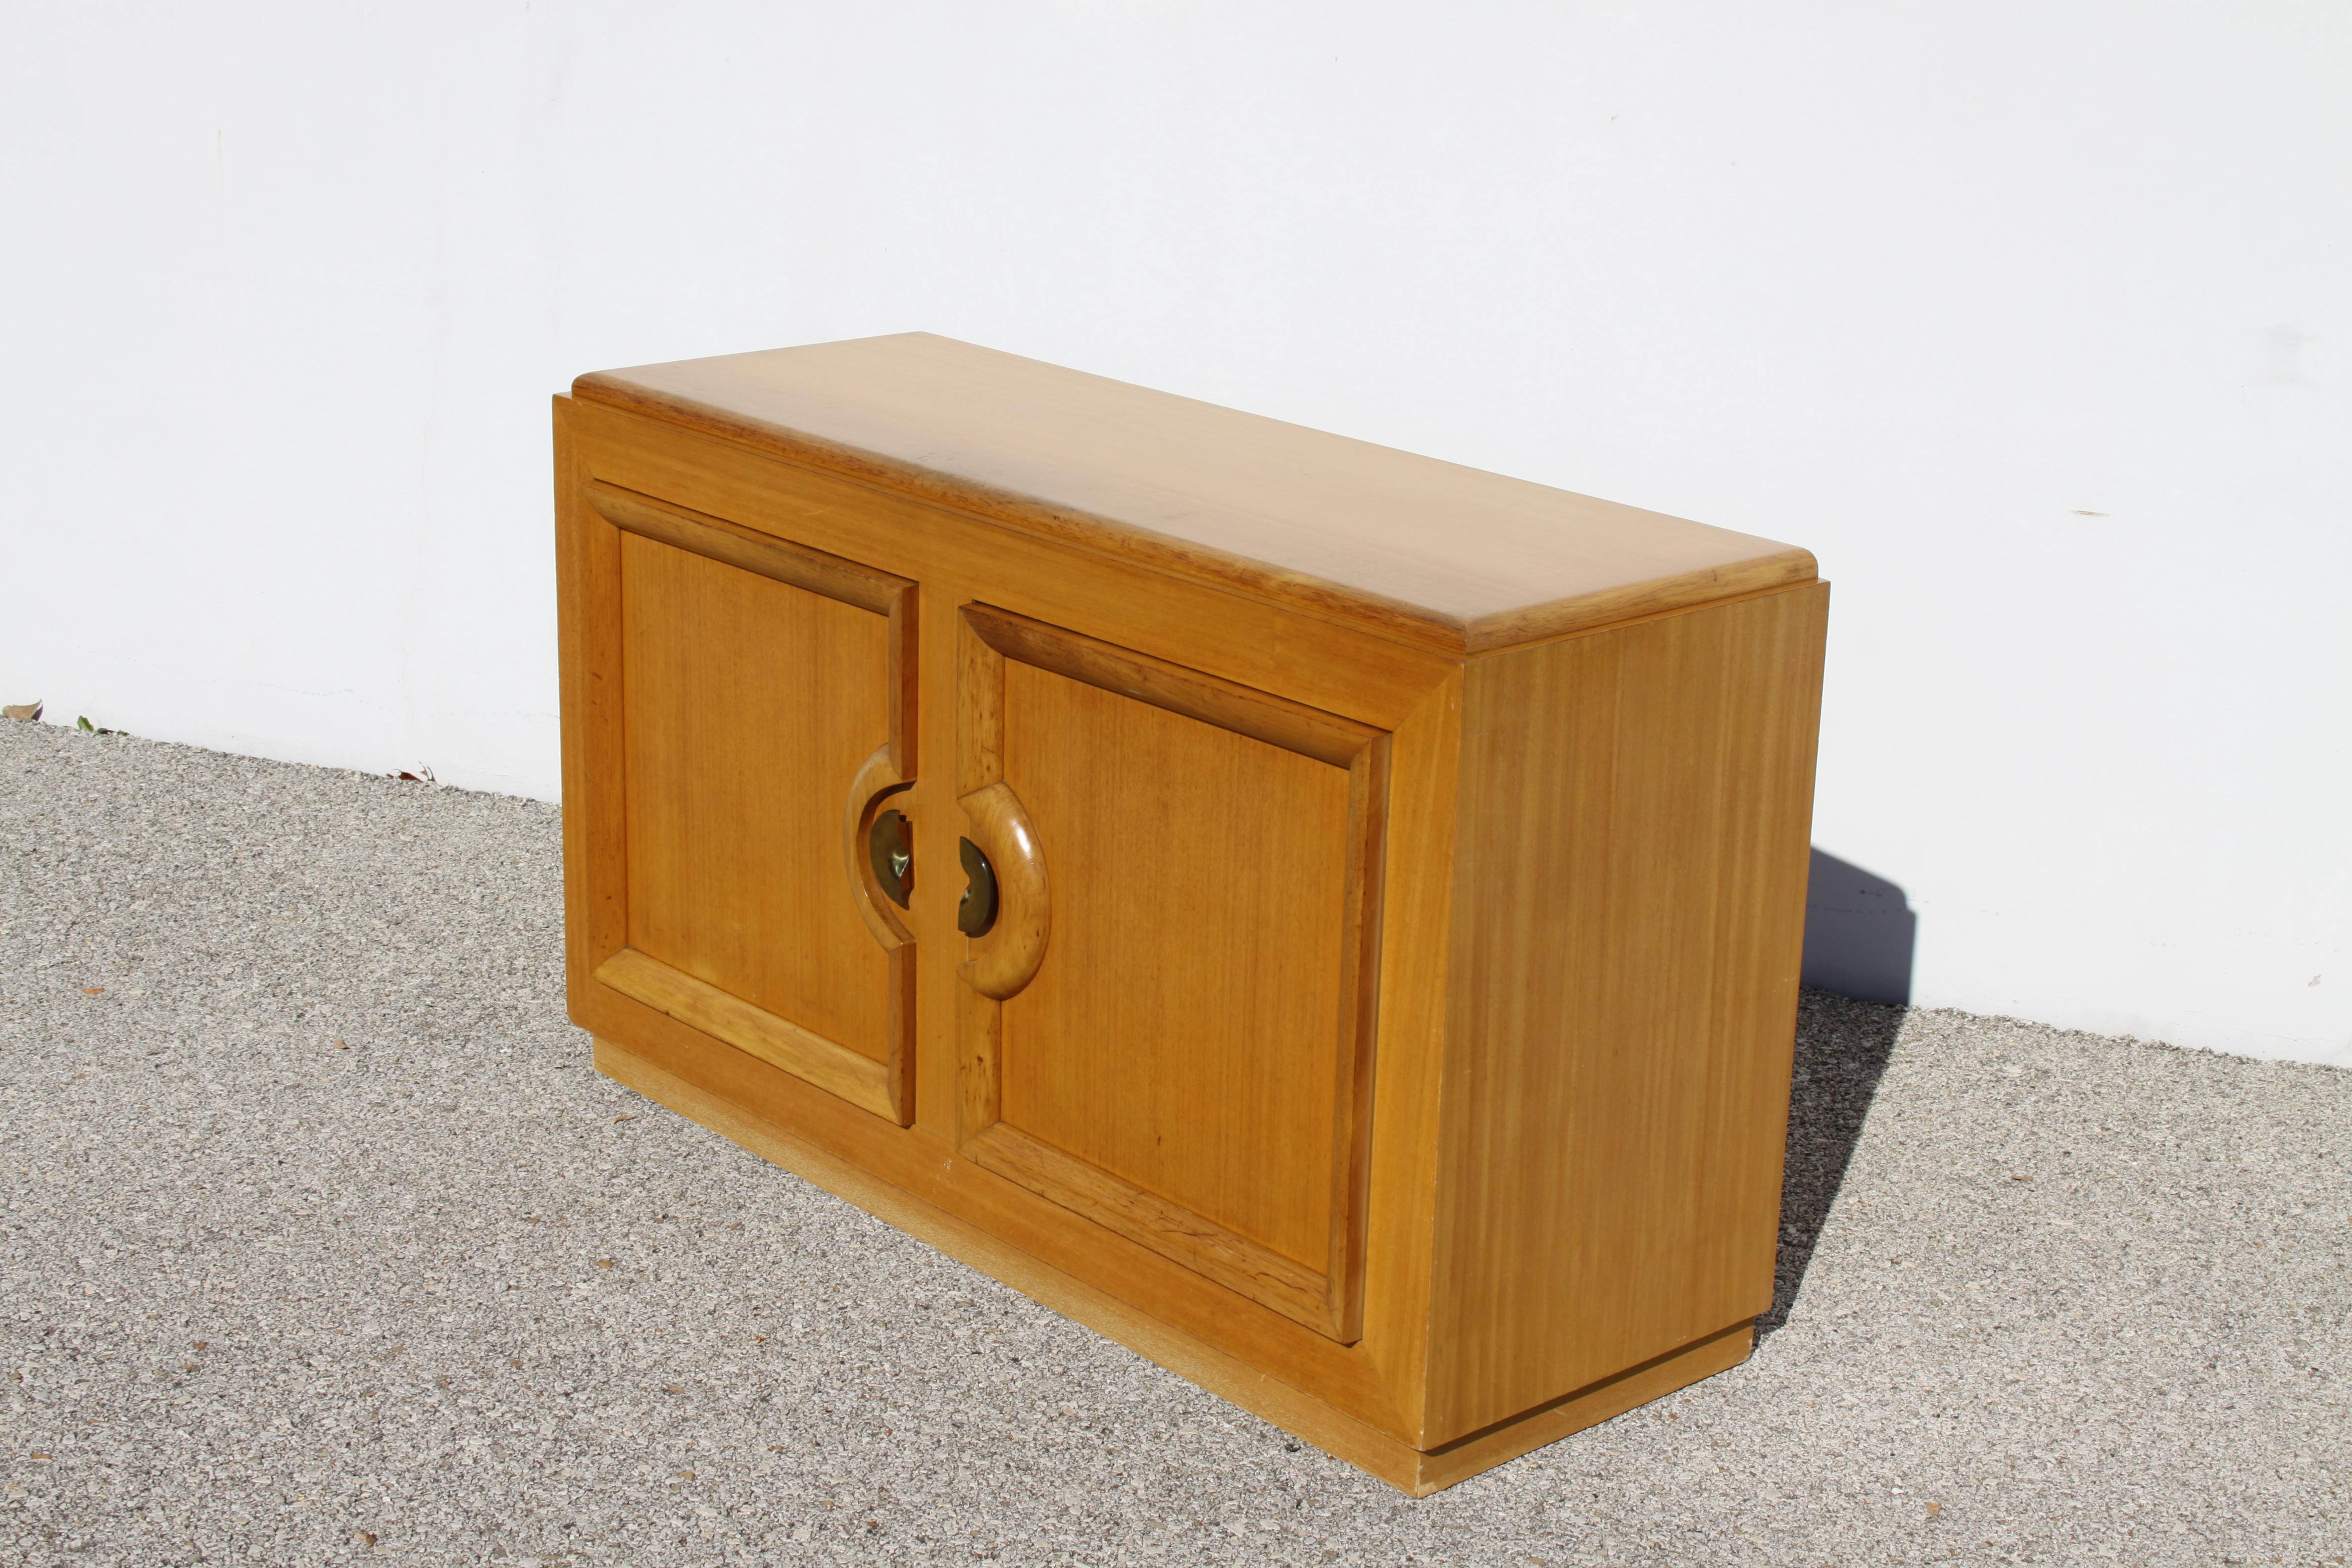 American Mid-Century Modern Blond Sideboard Cabinet Attributed to Paul Laszlo For Sale